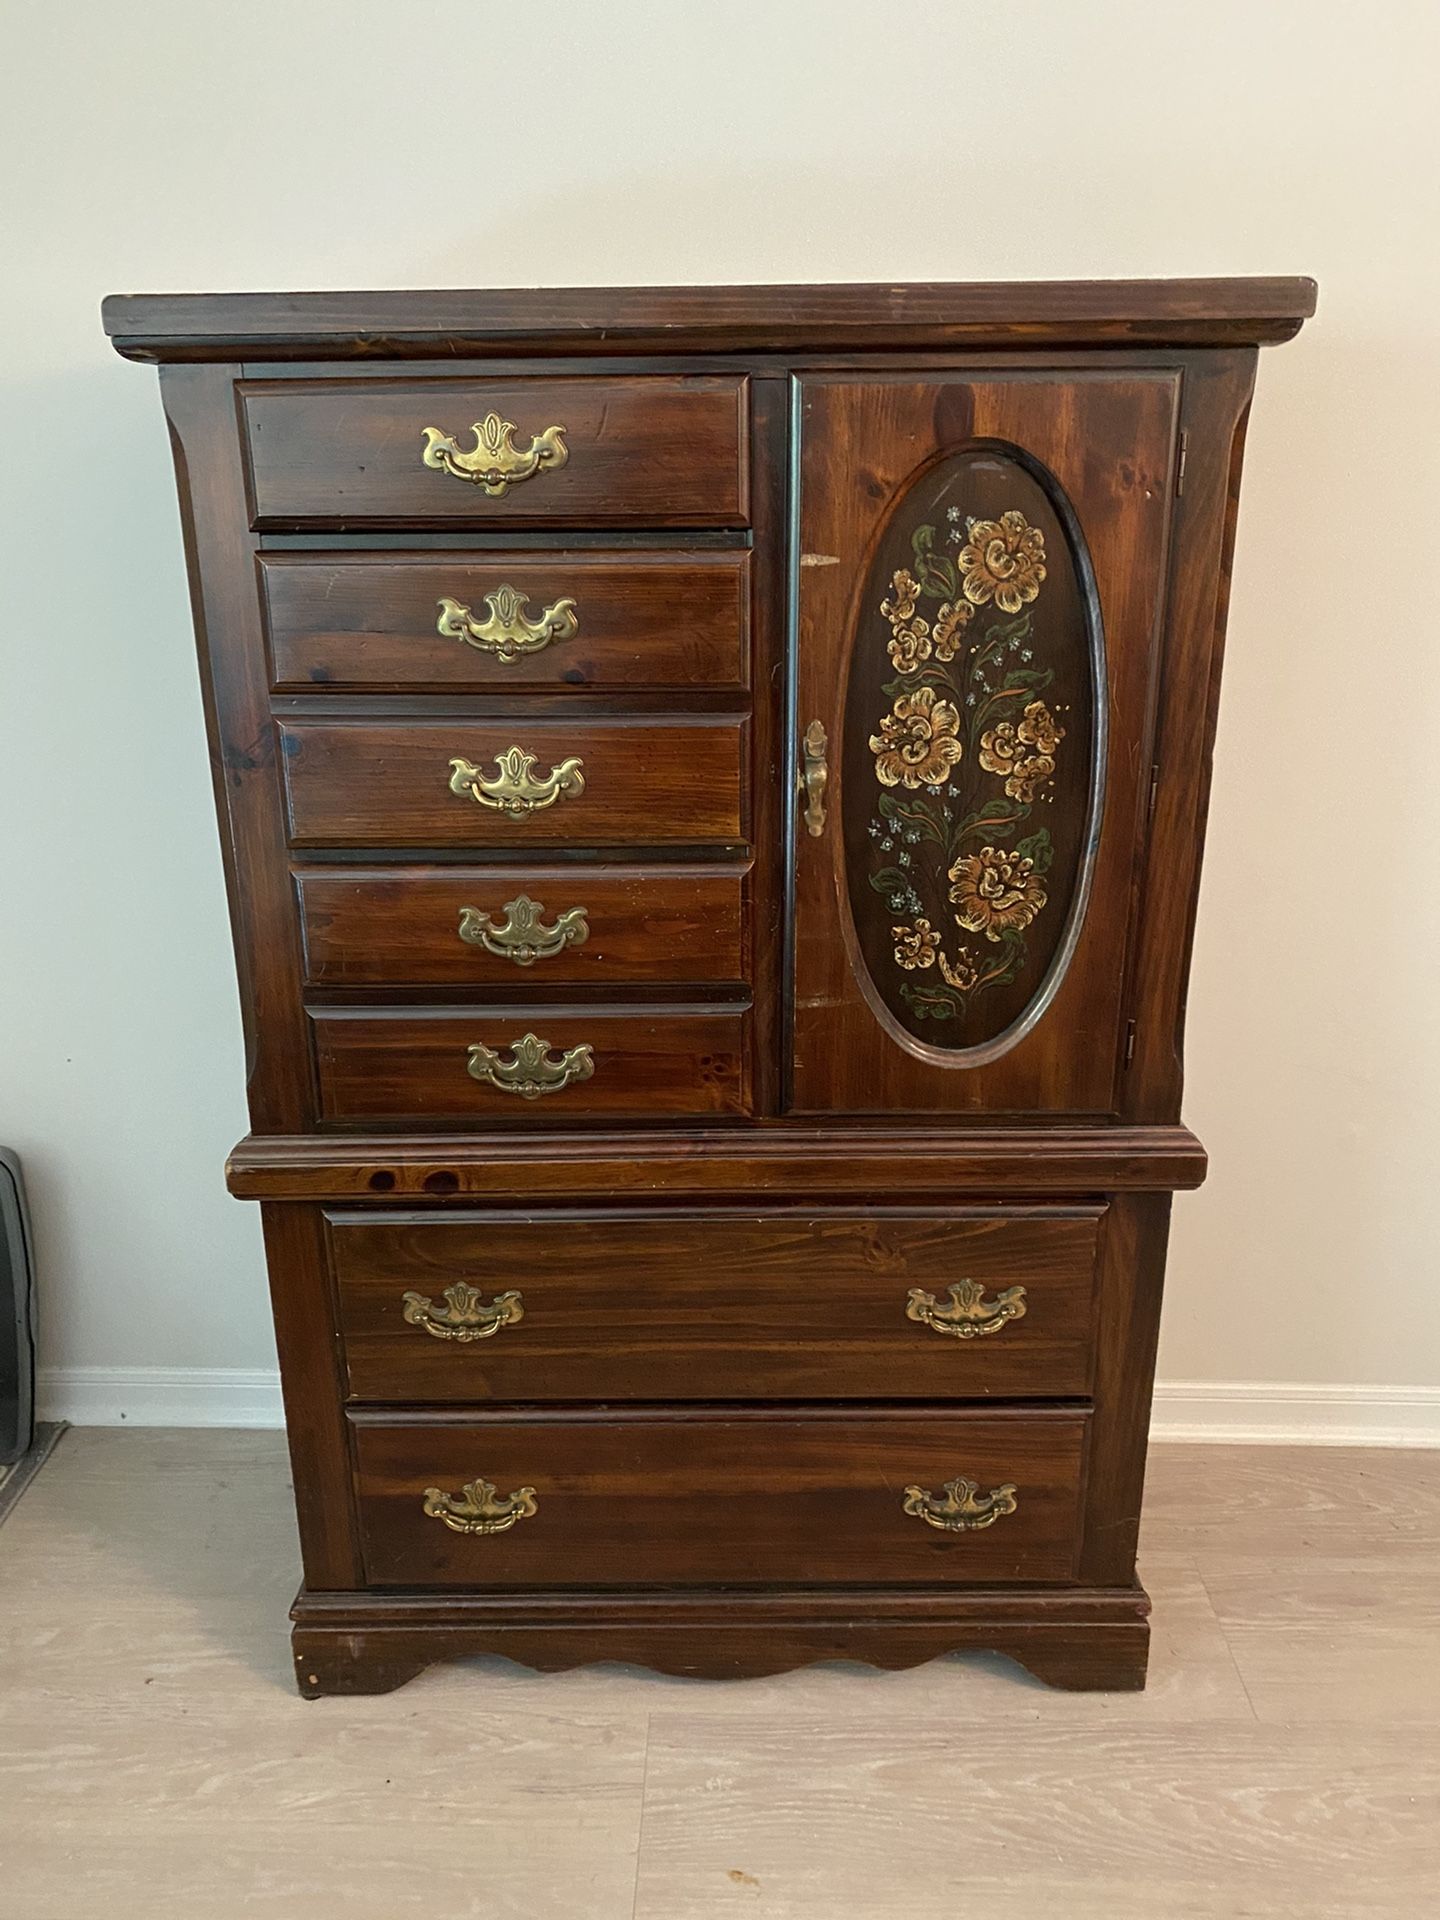 Solid Wood dresser/armoire